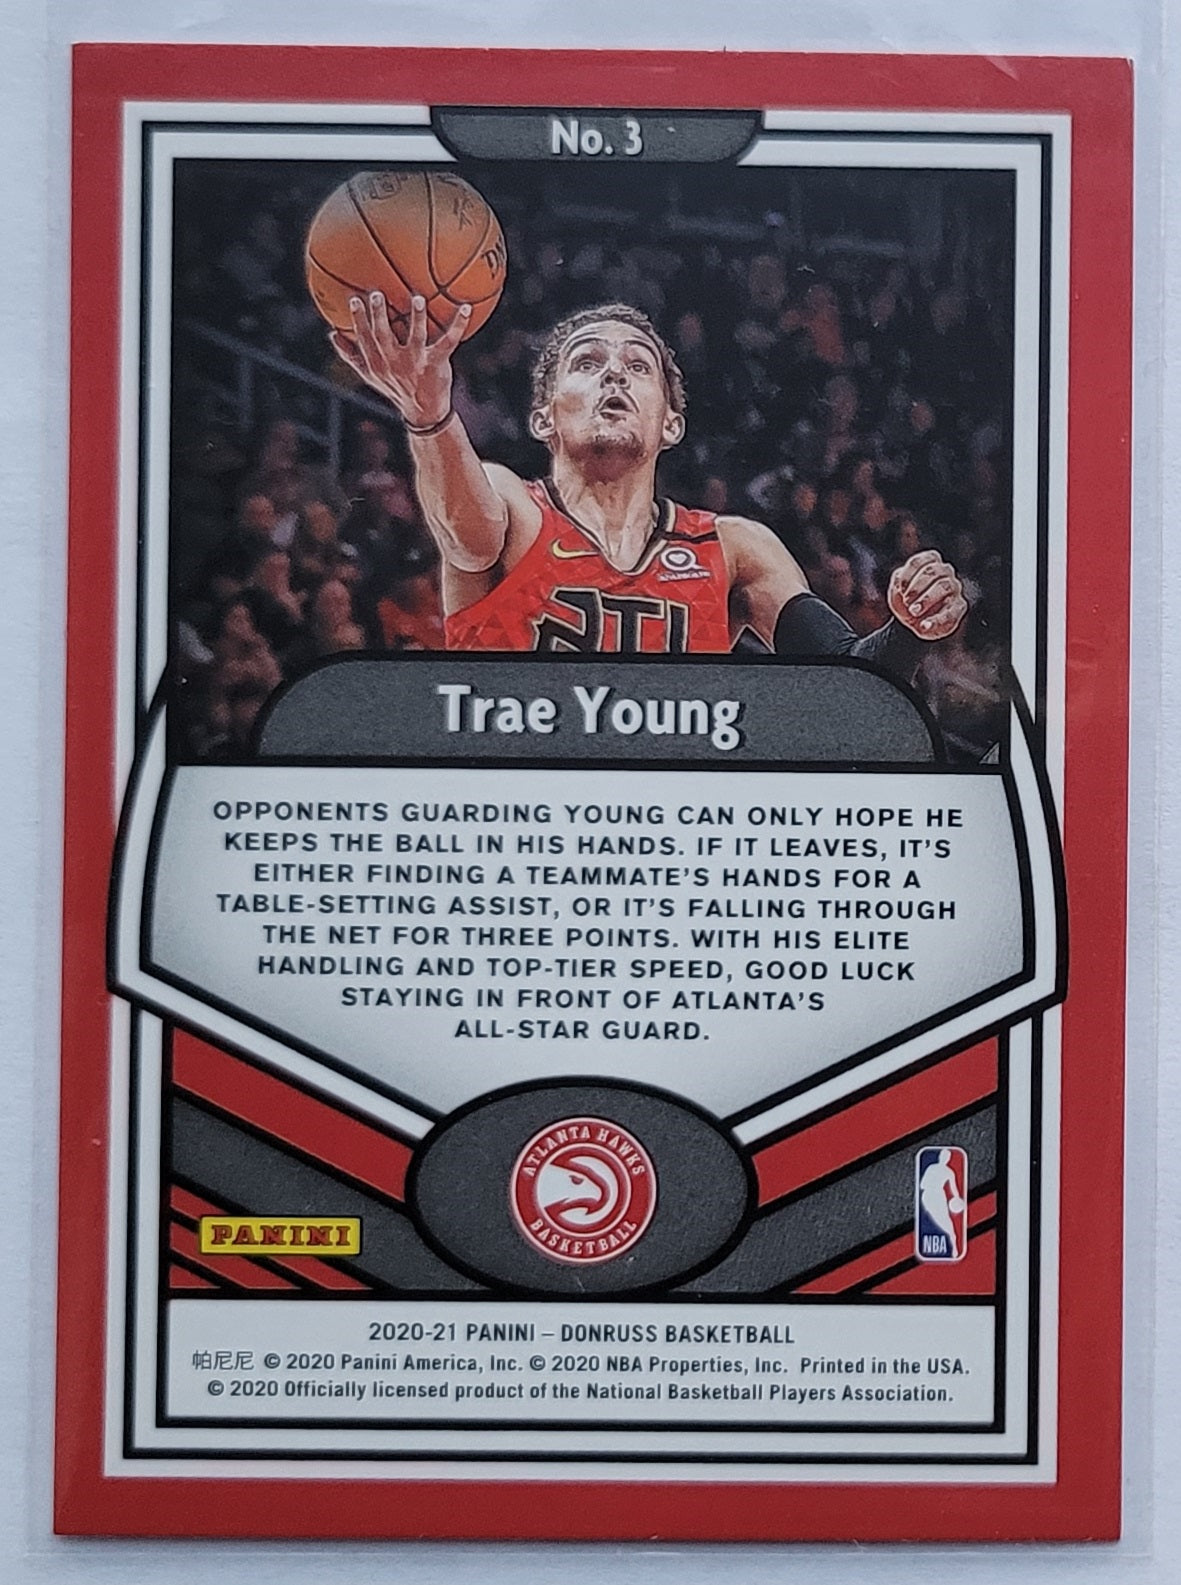 Trae Young - 2020-21 Donruss Complete Players #3